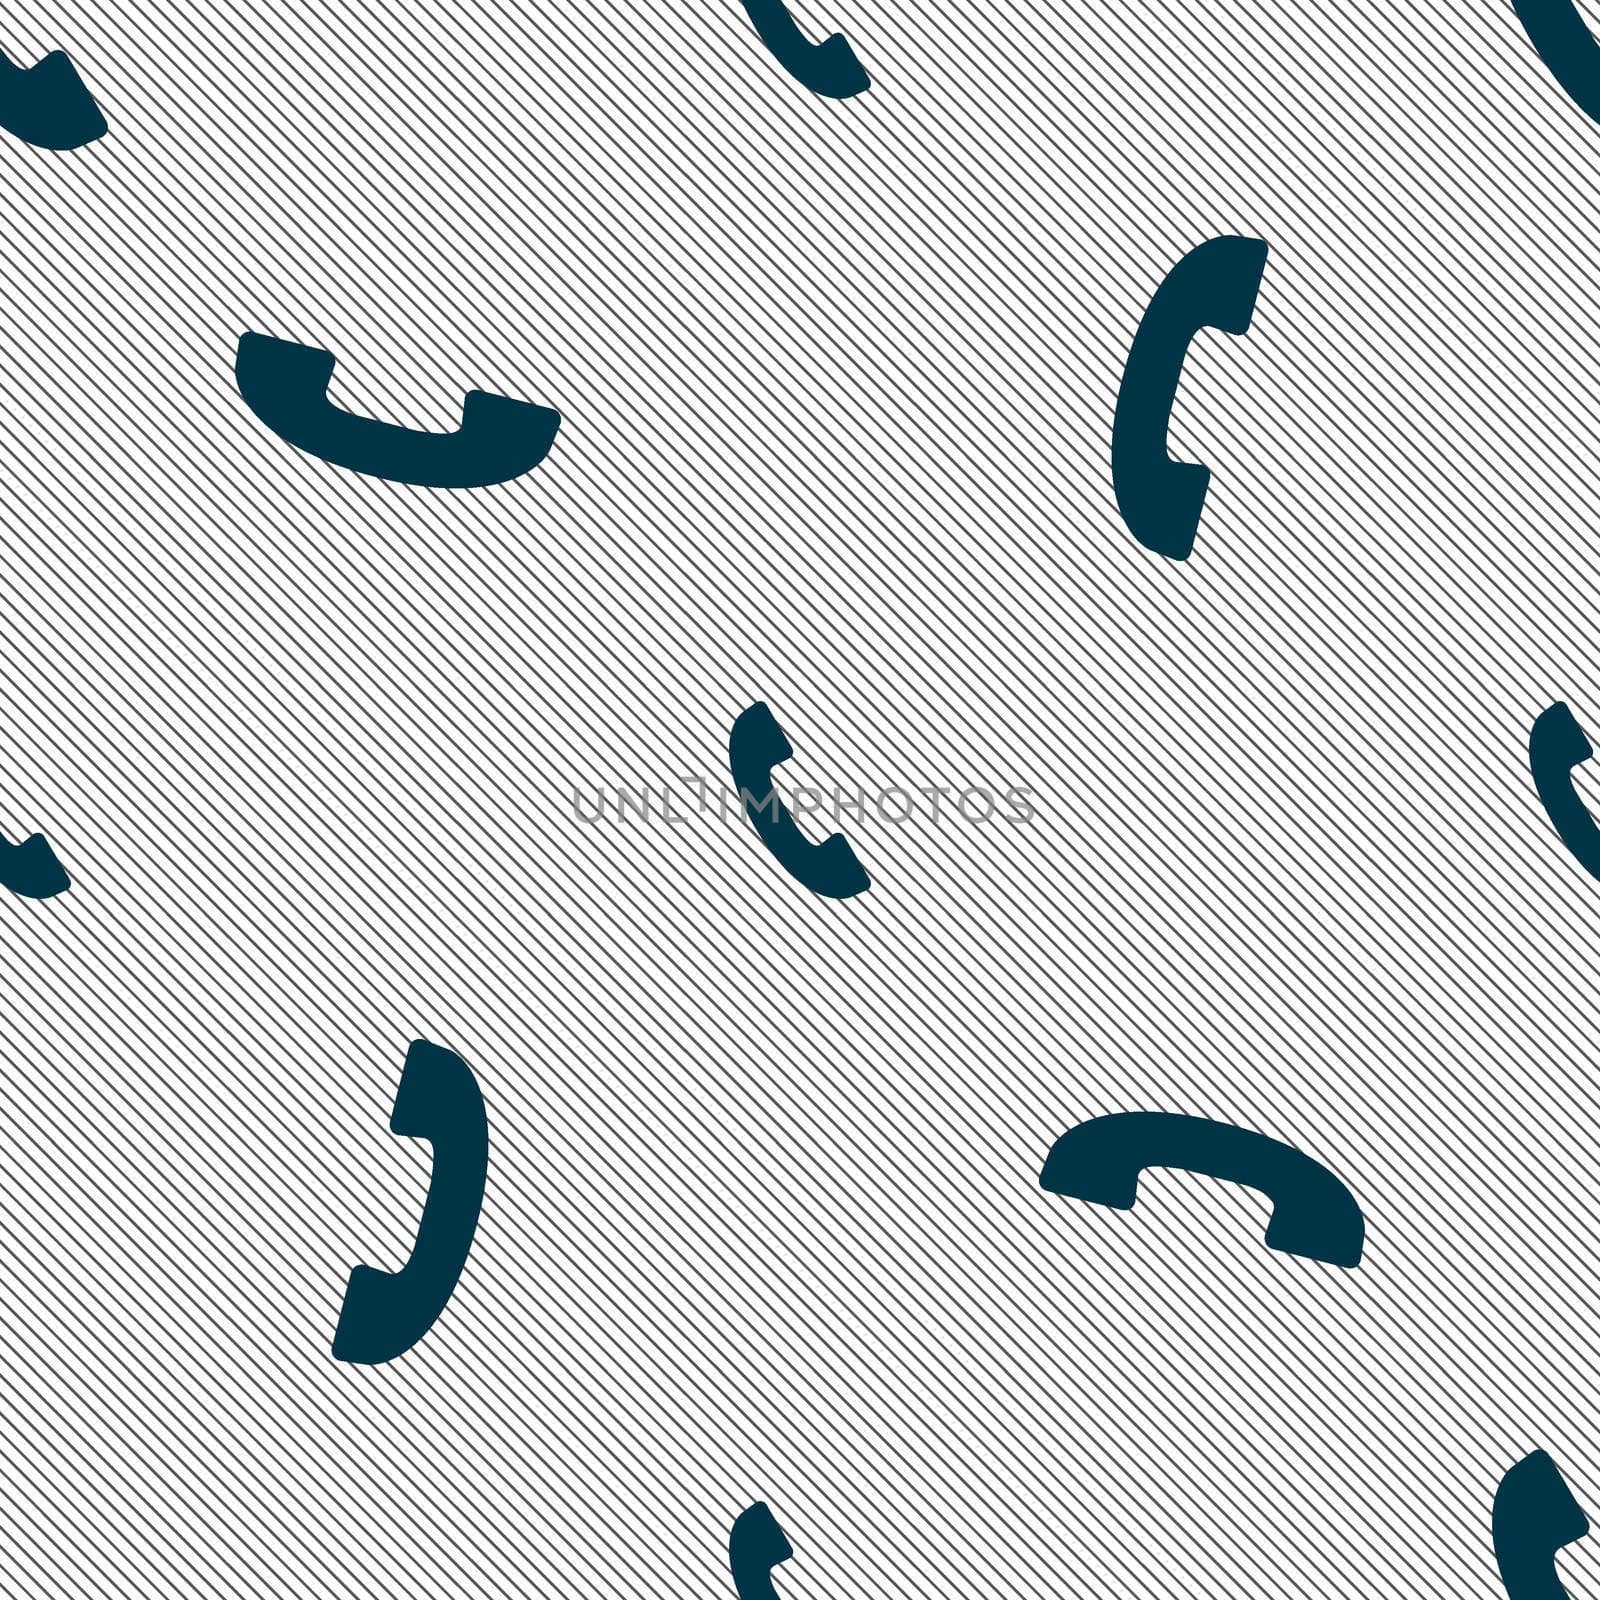 Phone sign icon. Support symbol. Call center. Seamless pattern with geometric texture. illustration